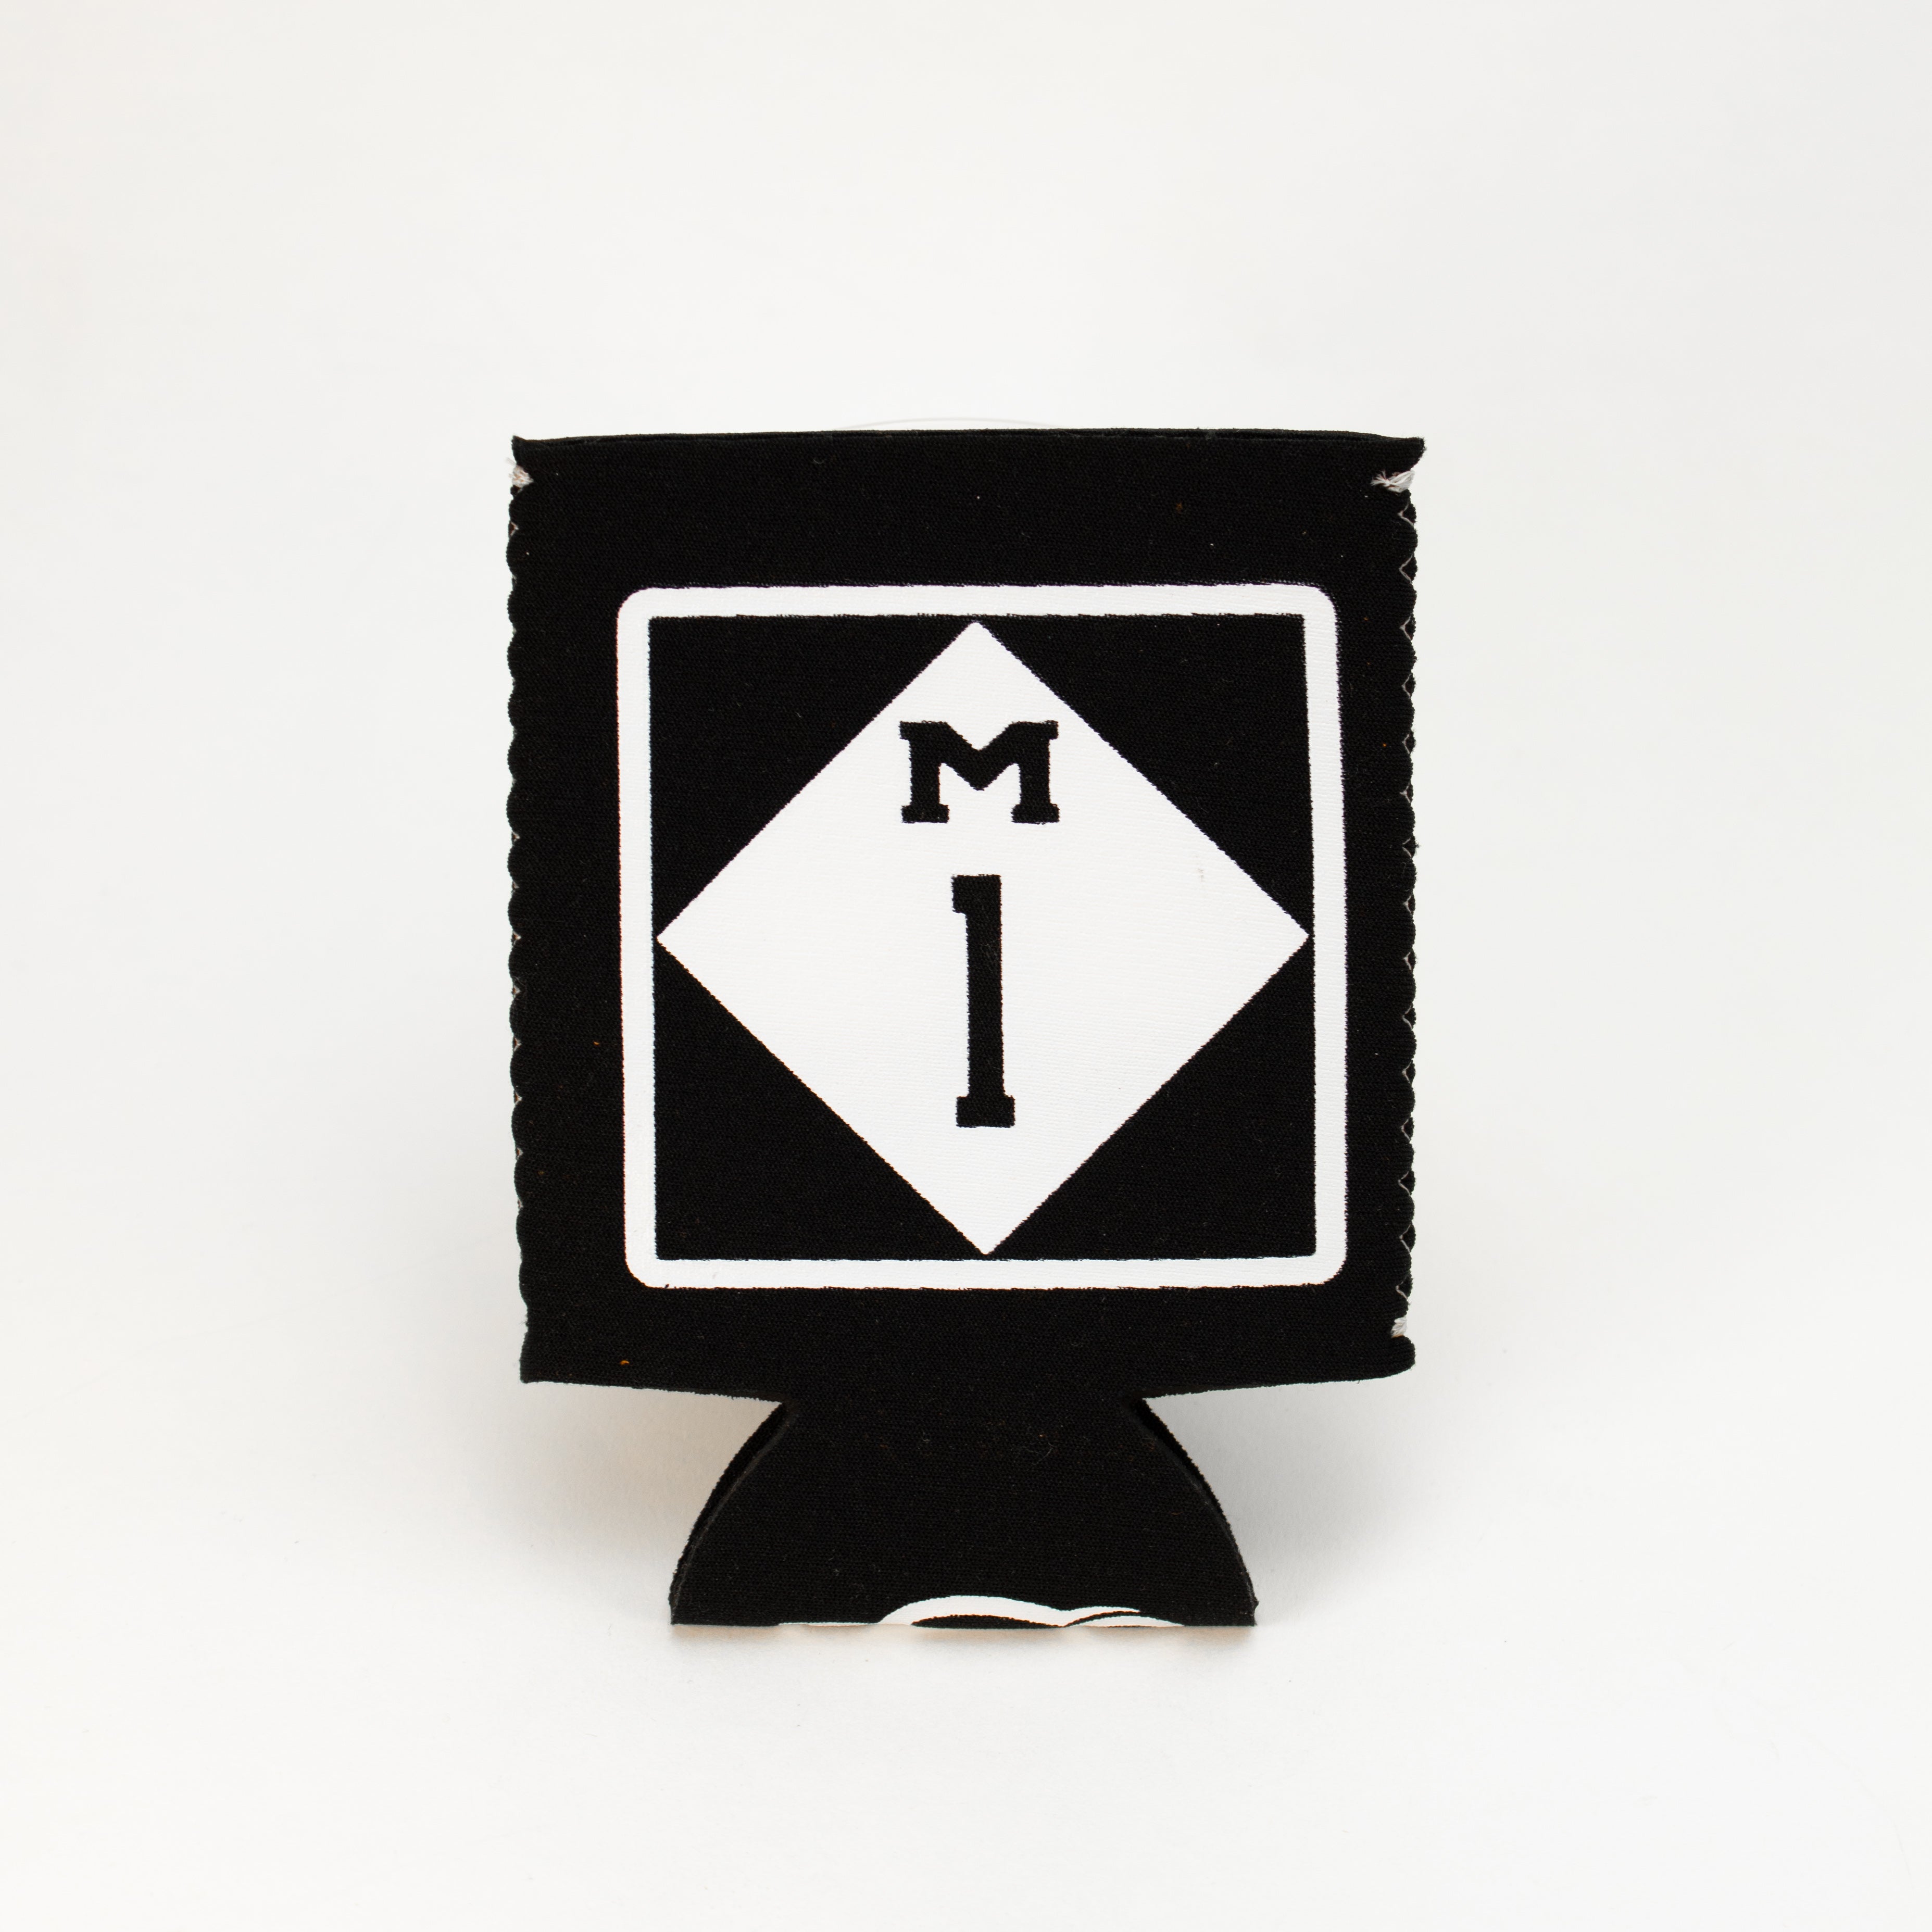 Coozie - M1 Woodward Ave